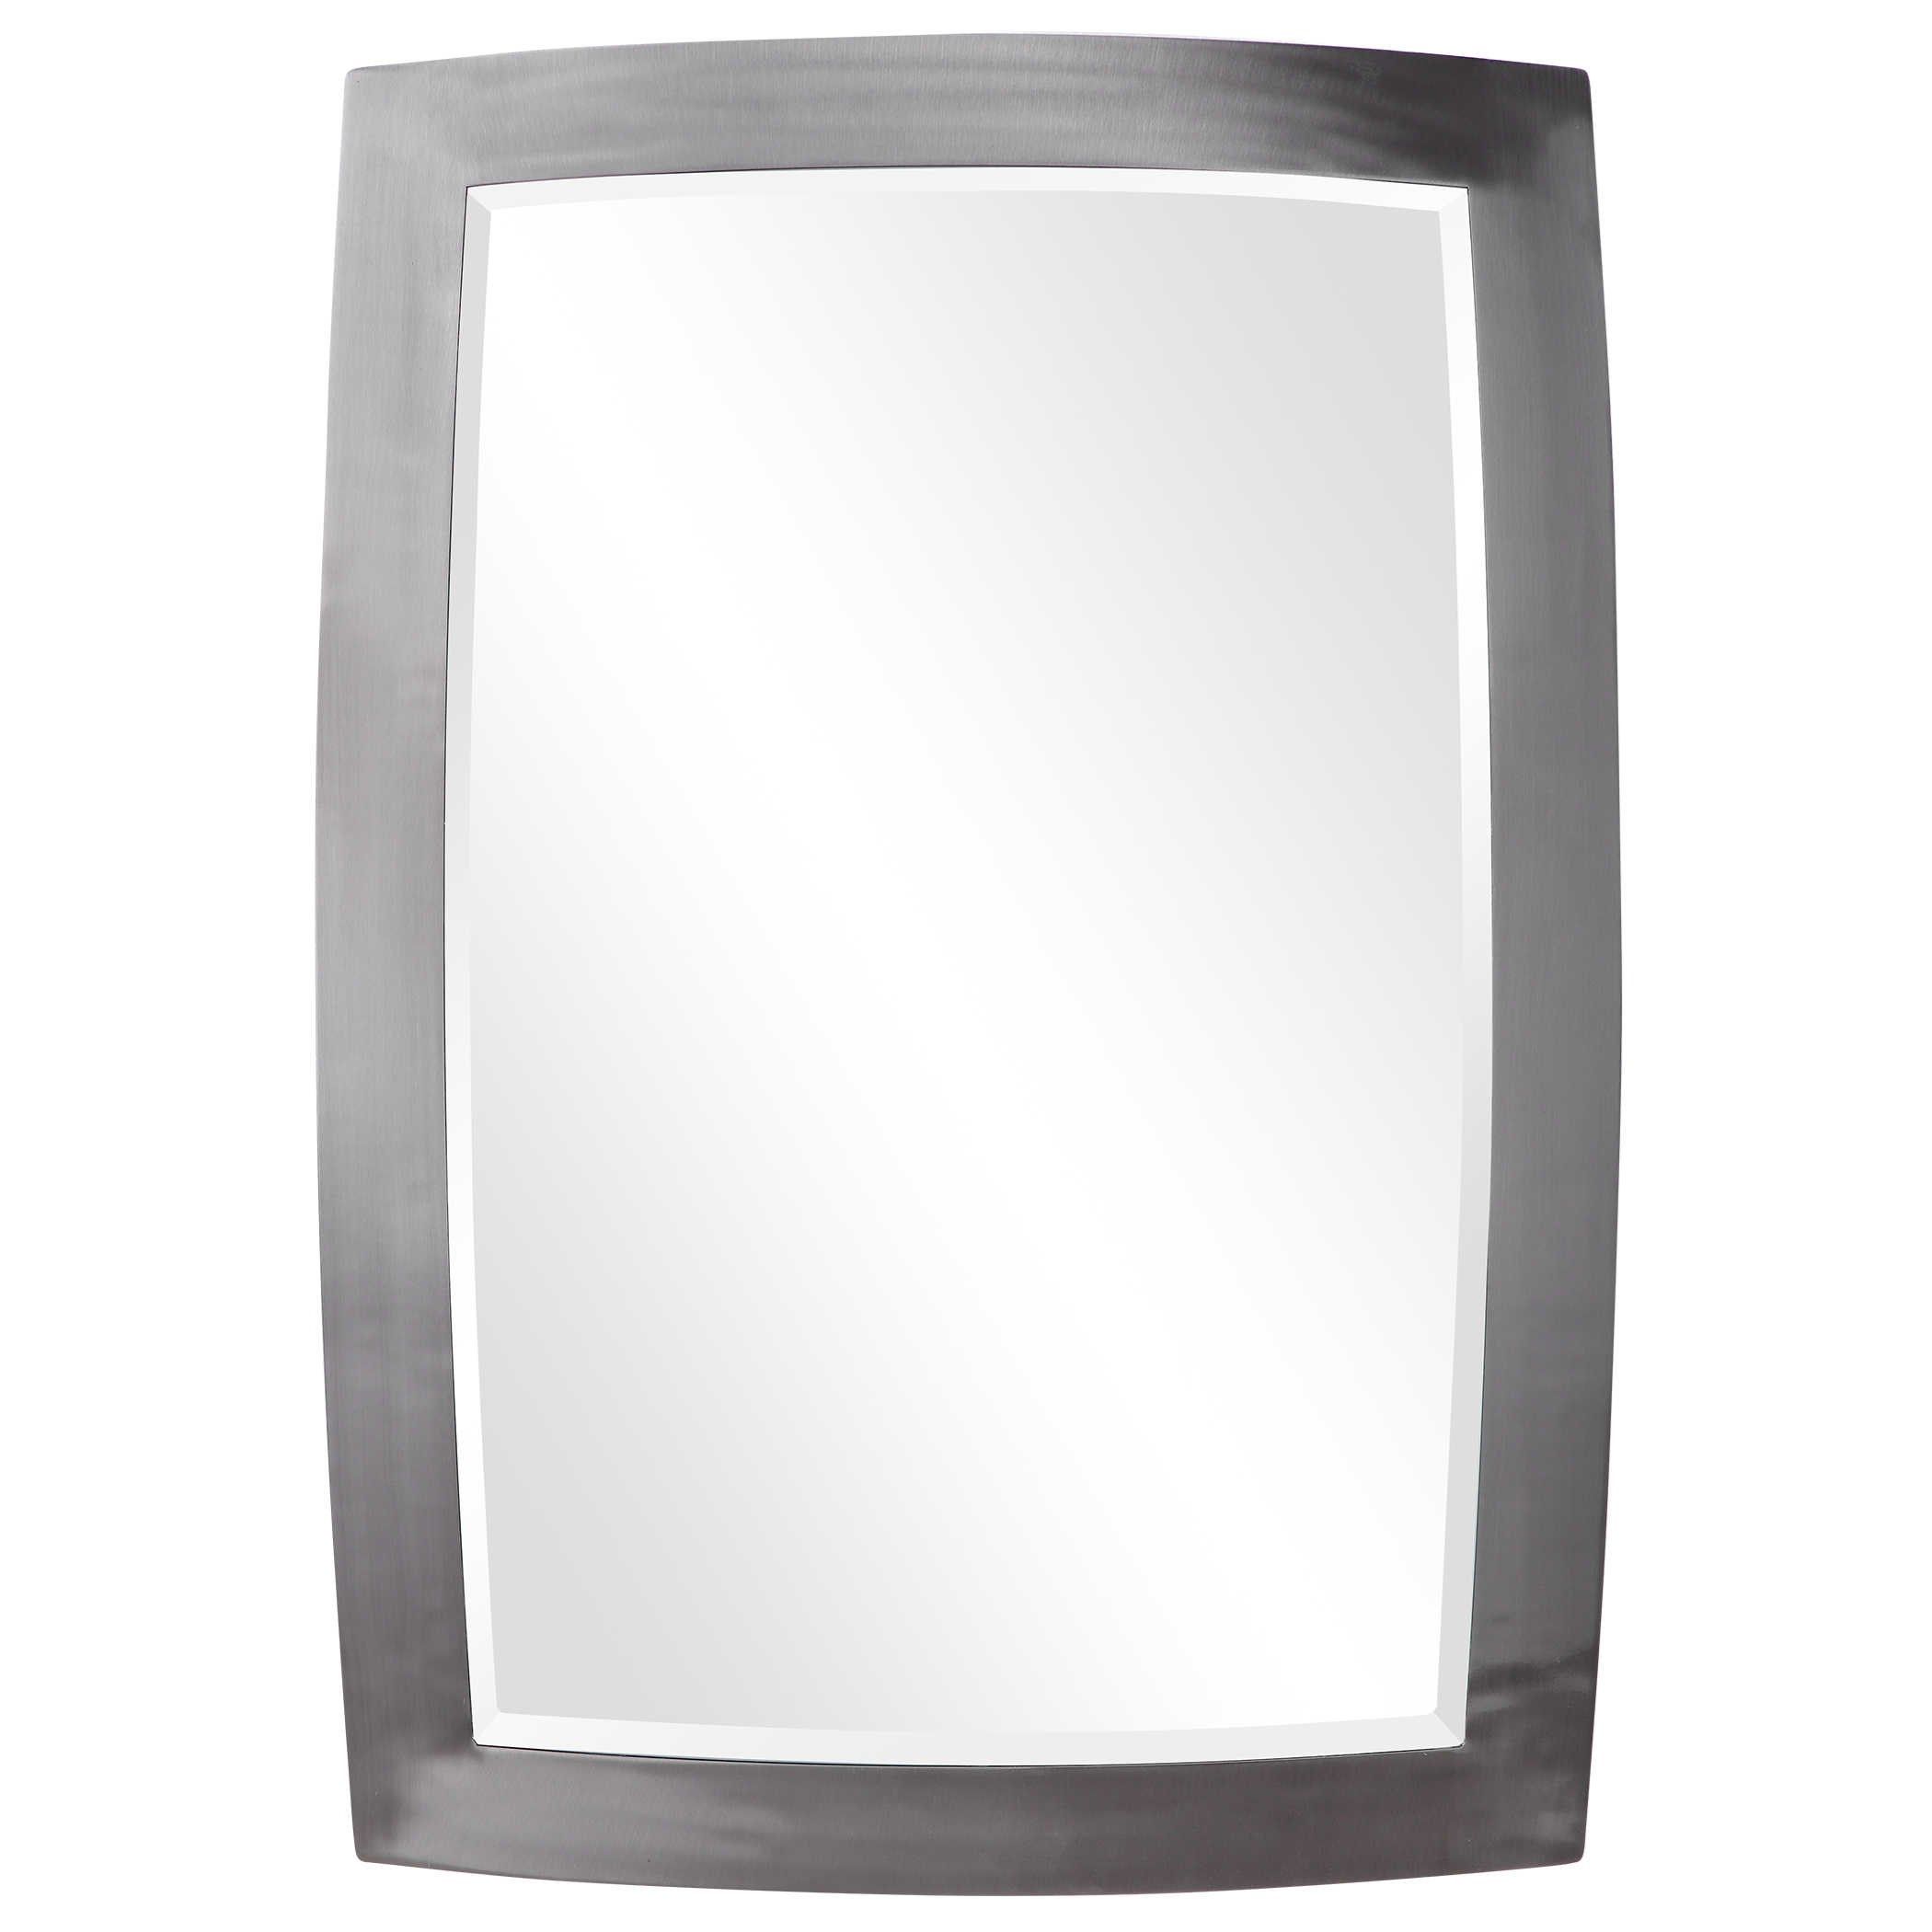 Uttermost Mirrors Haskill Brushed Nickel Mirror | Pedigo Furniture With Regard To Brushed Nickel Wall Mirrors (View 8 of 15)